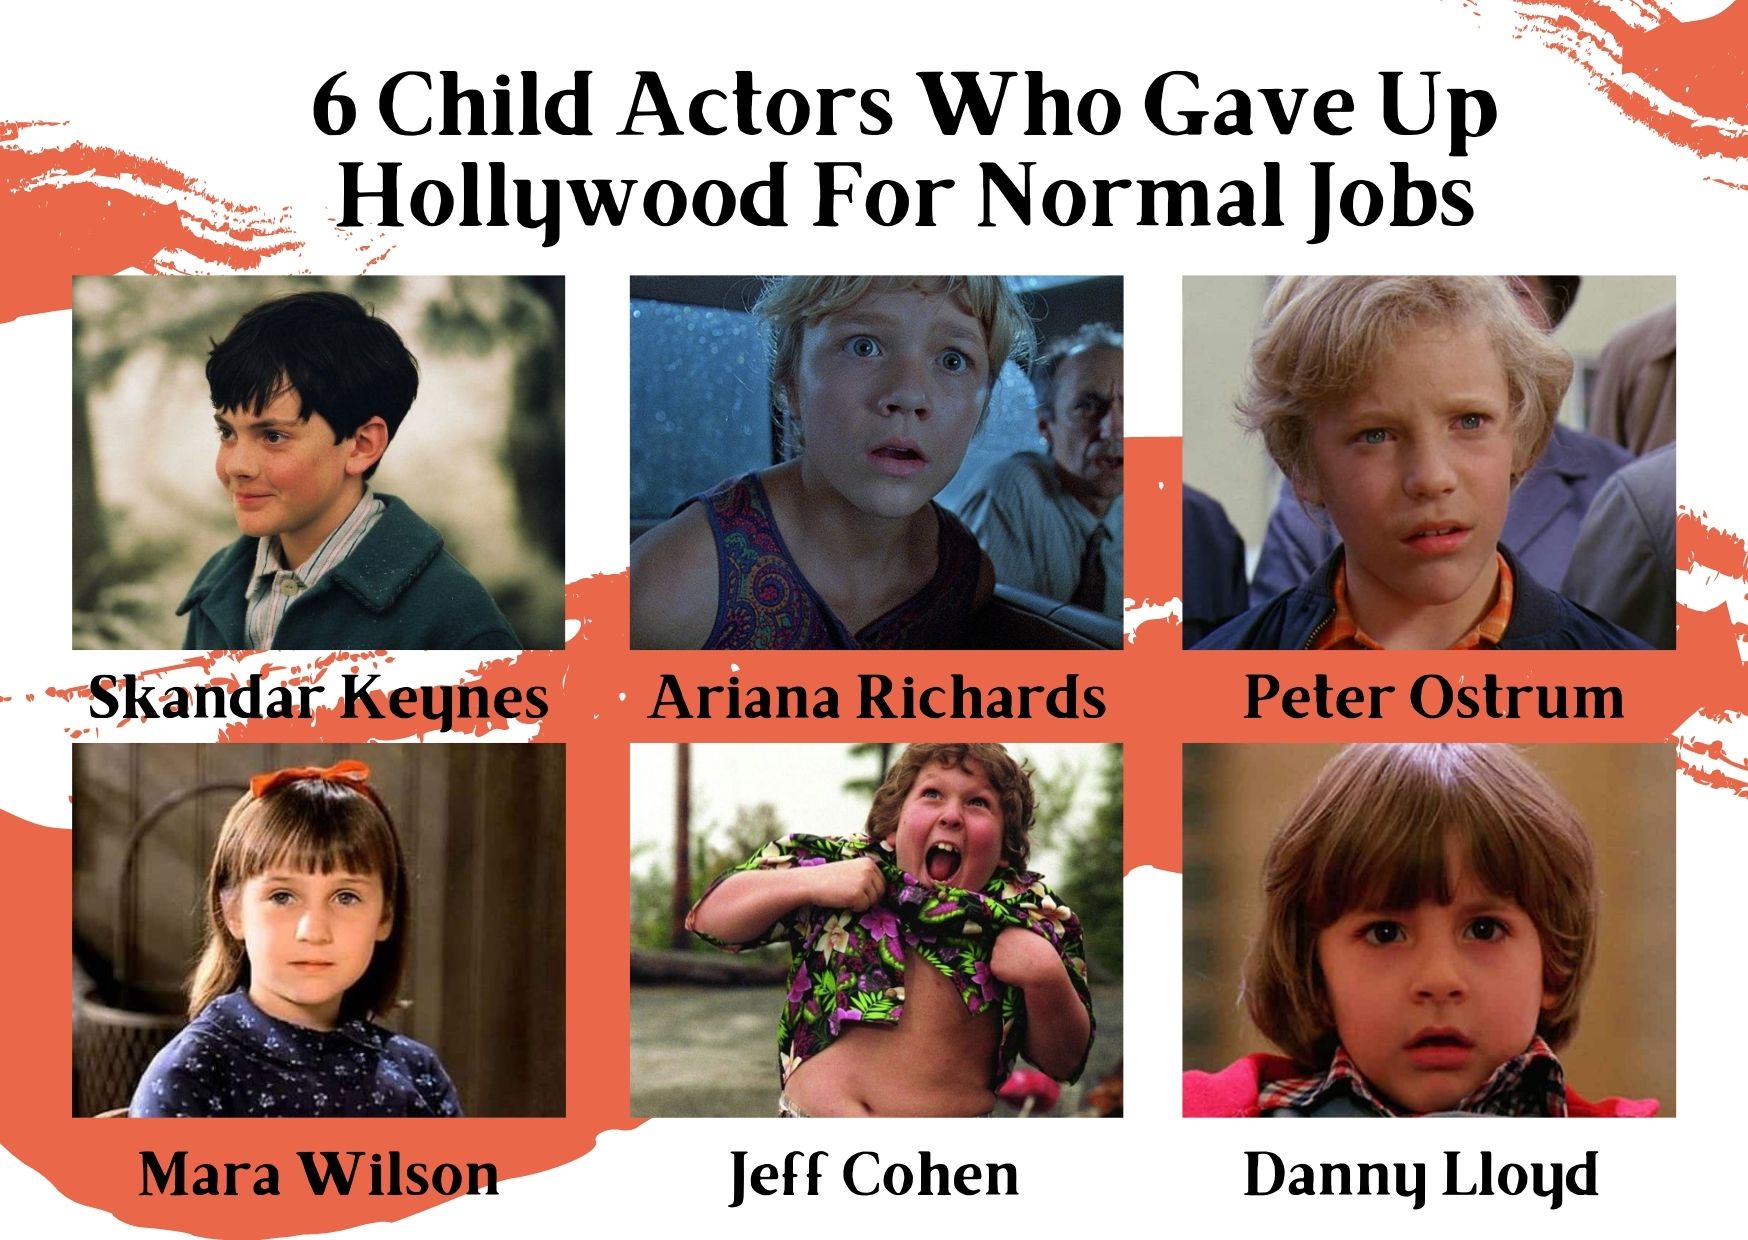 From Limelight To Normal Life - Meet The 6 Child Actors Who Gave Up Hollywood For Normal Jobs